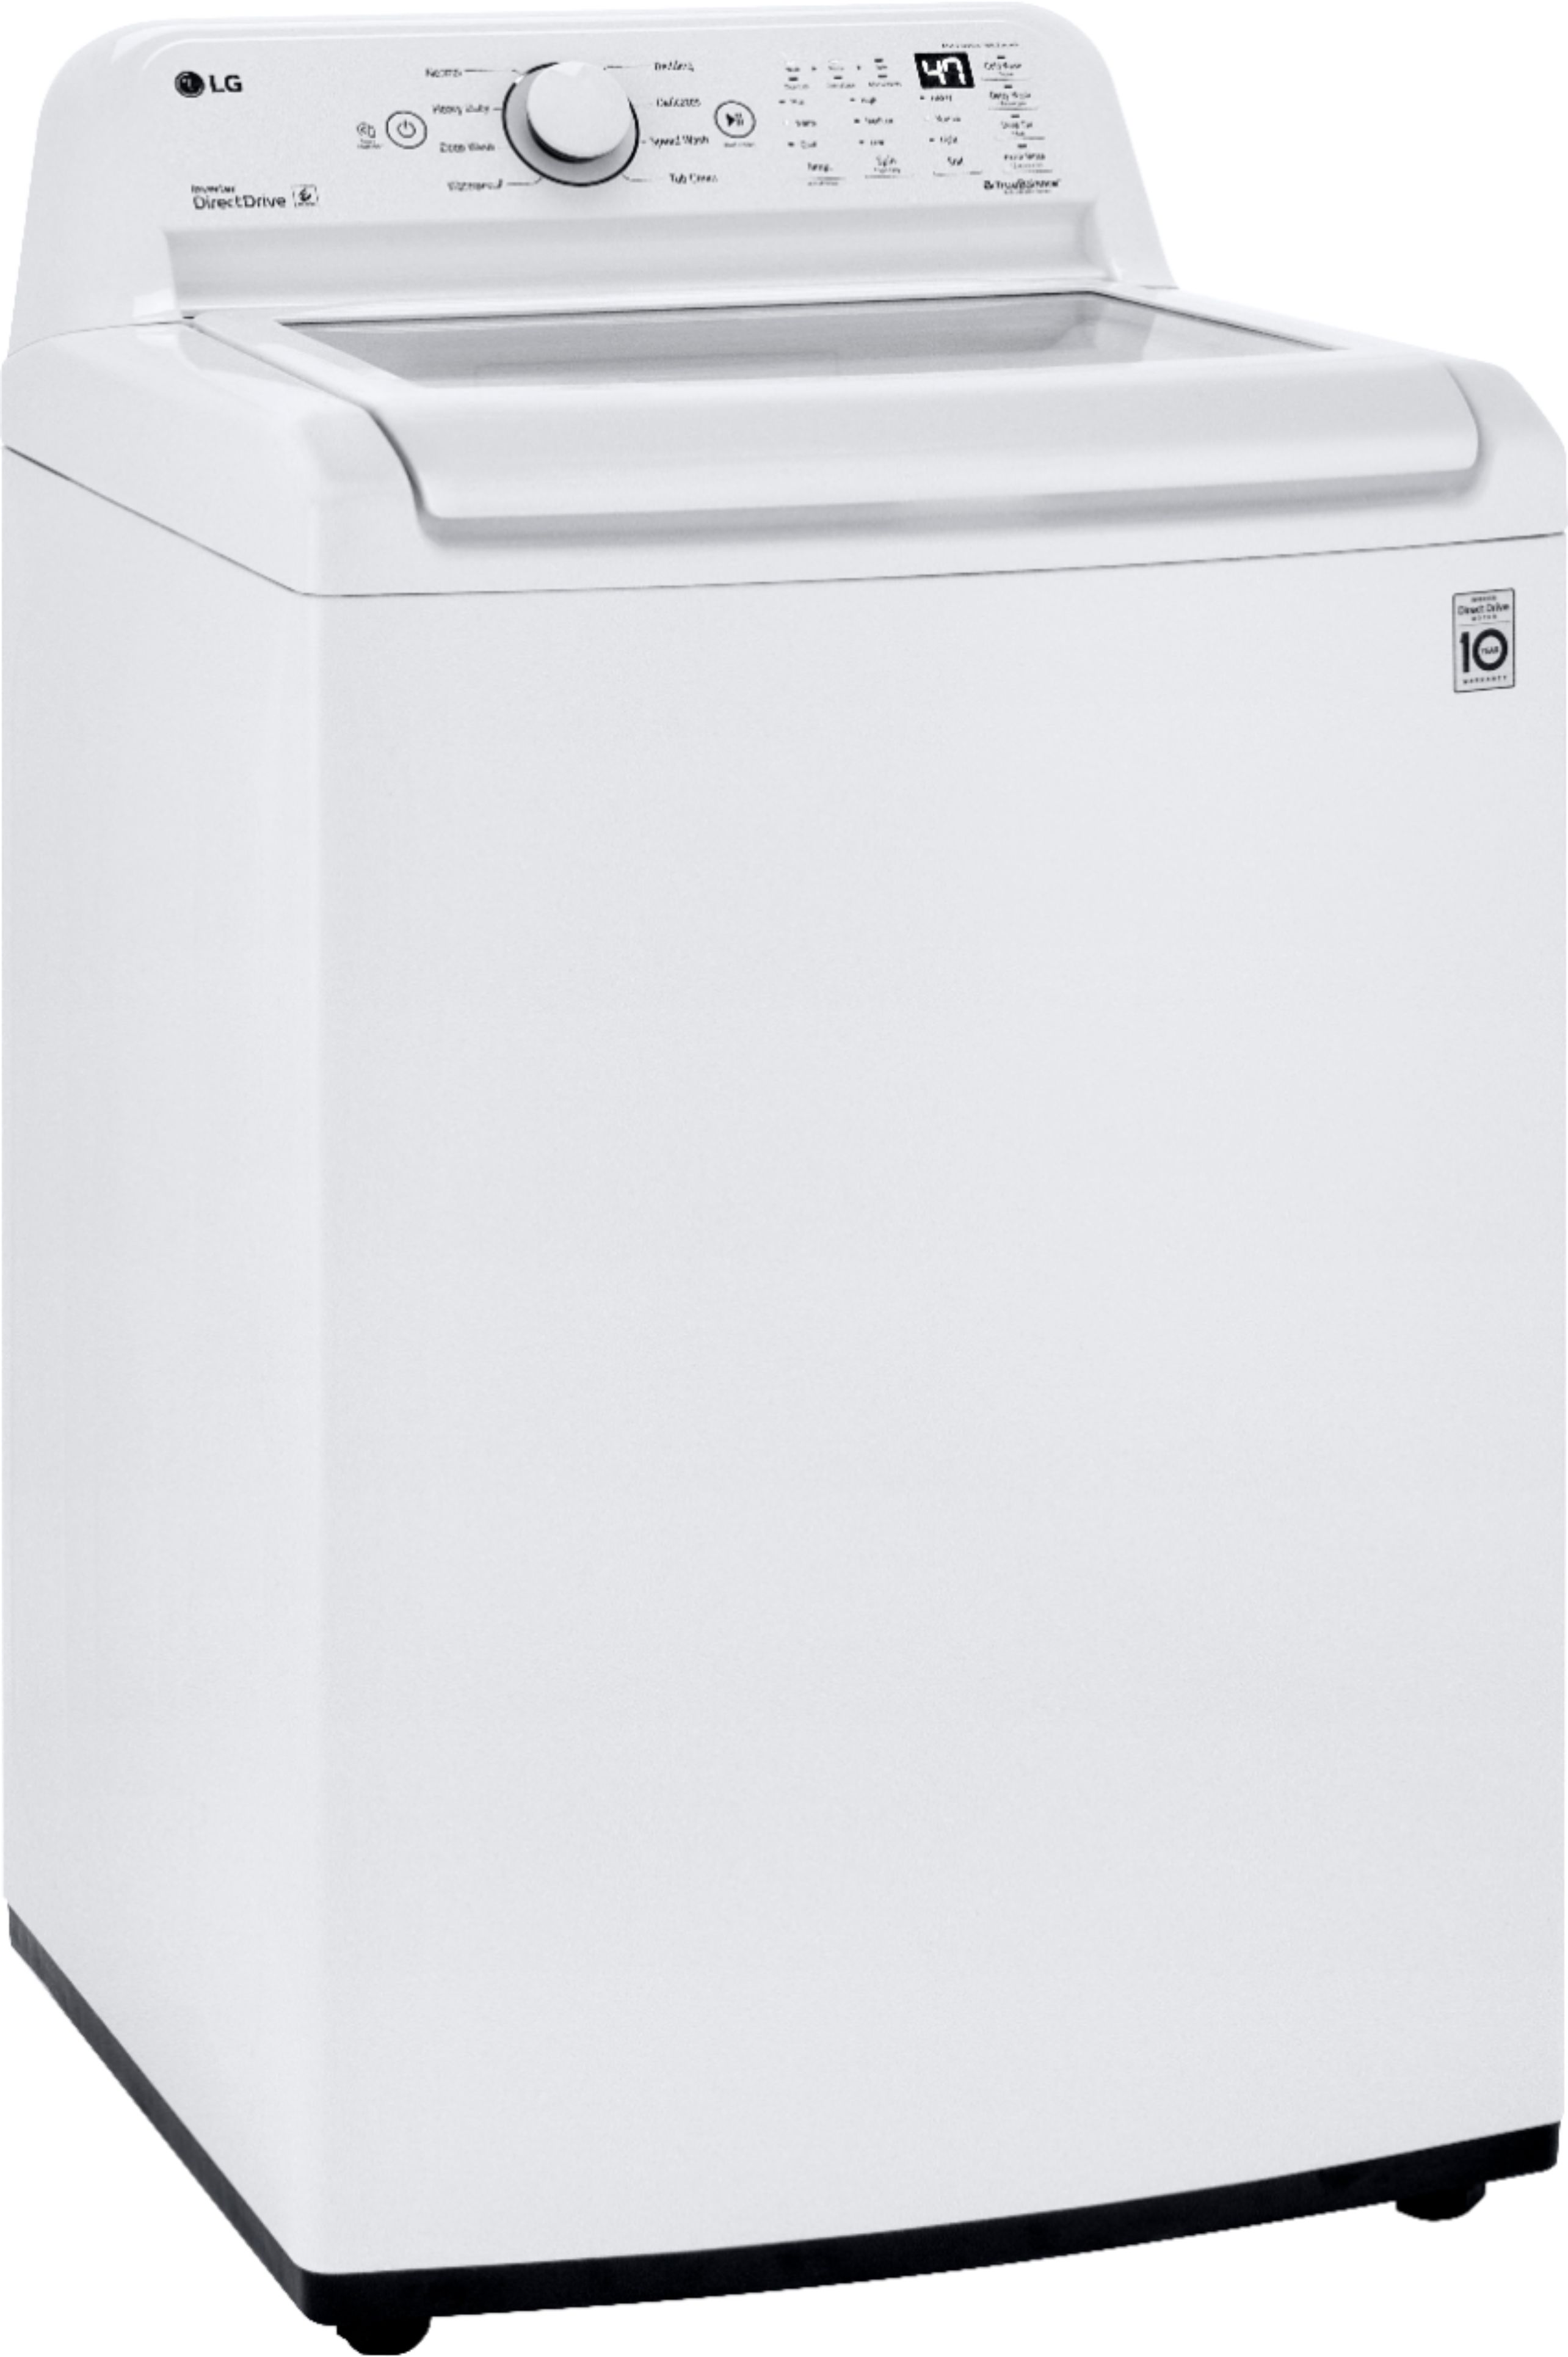 Left View: Samsung - 4.5 Cu. Ft. High Efficiency Top Load Washer with Active WaterJet - White